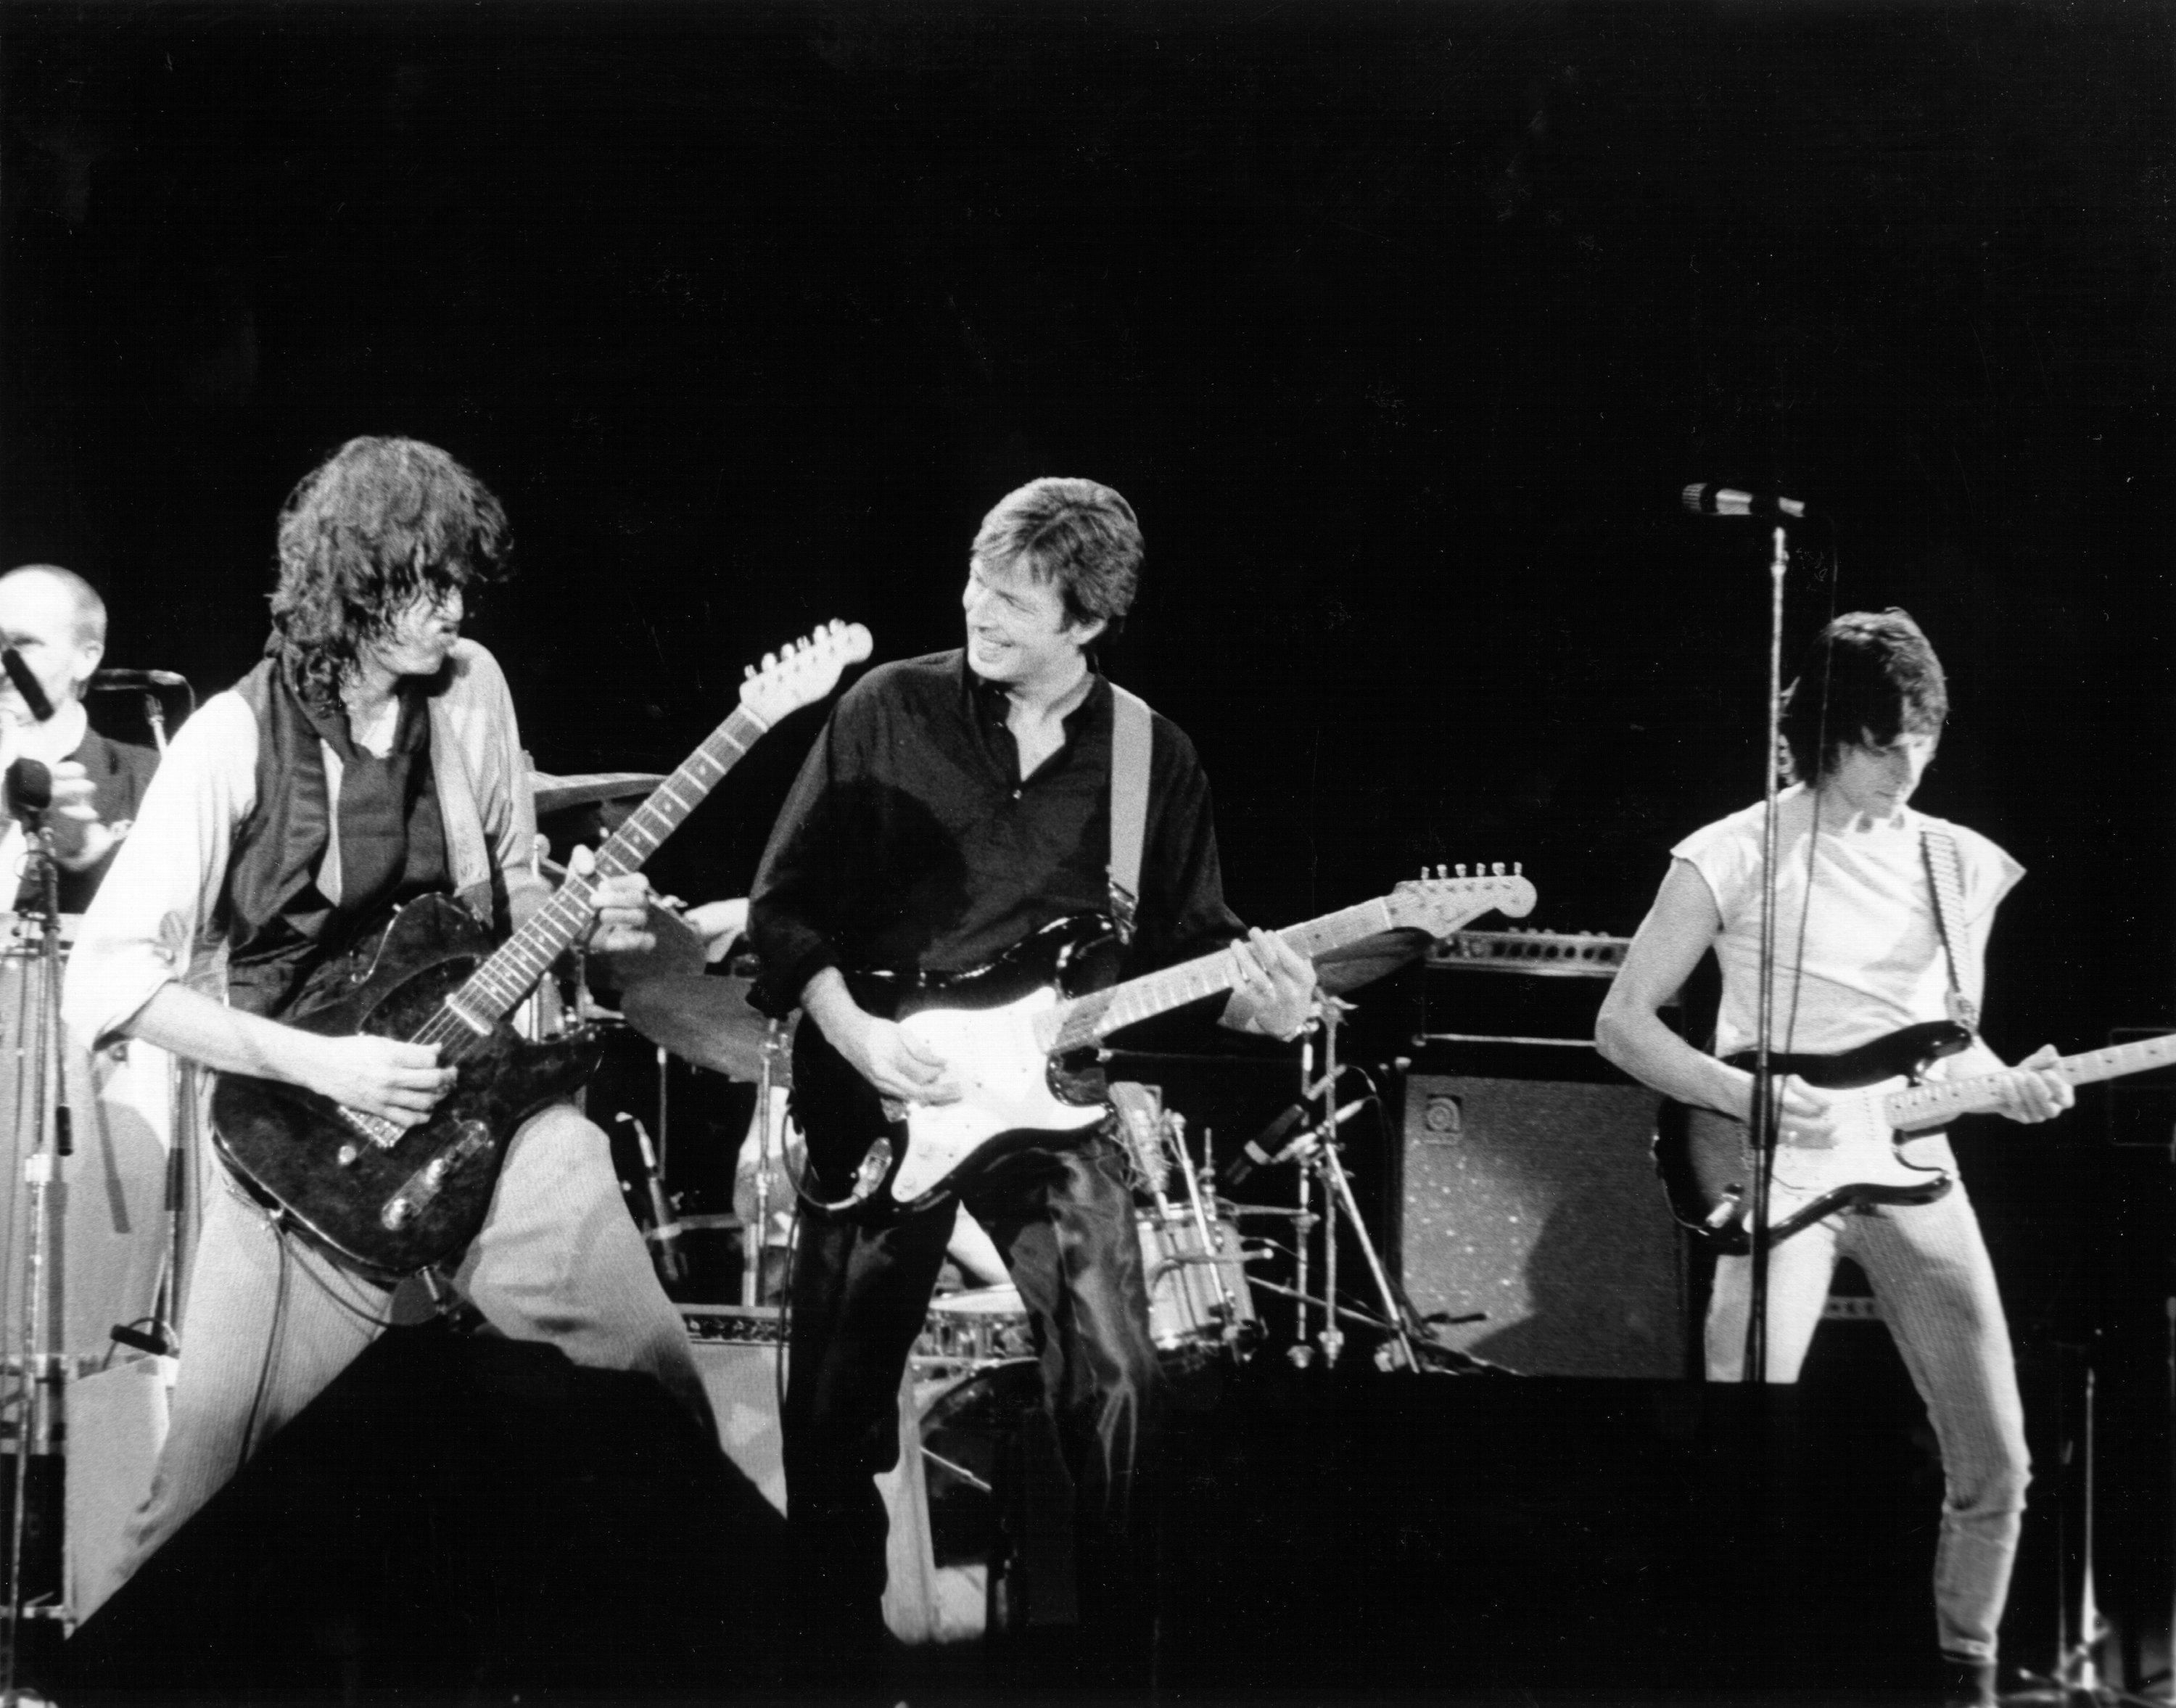 The guitarists Eric Claption, Jeff Beck and Jimmy Page give a concert in Royal Albert Hall in London, in 1983.